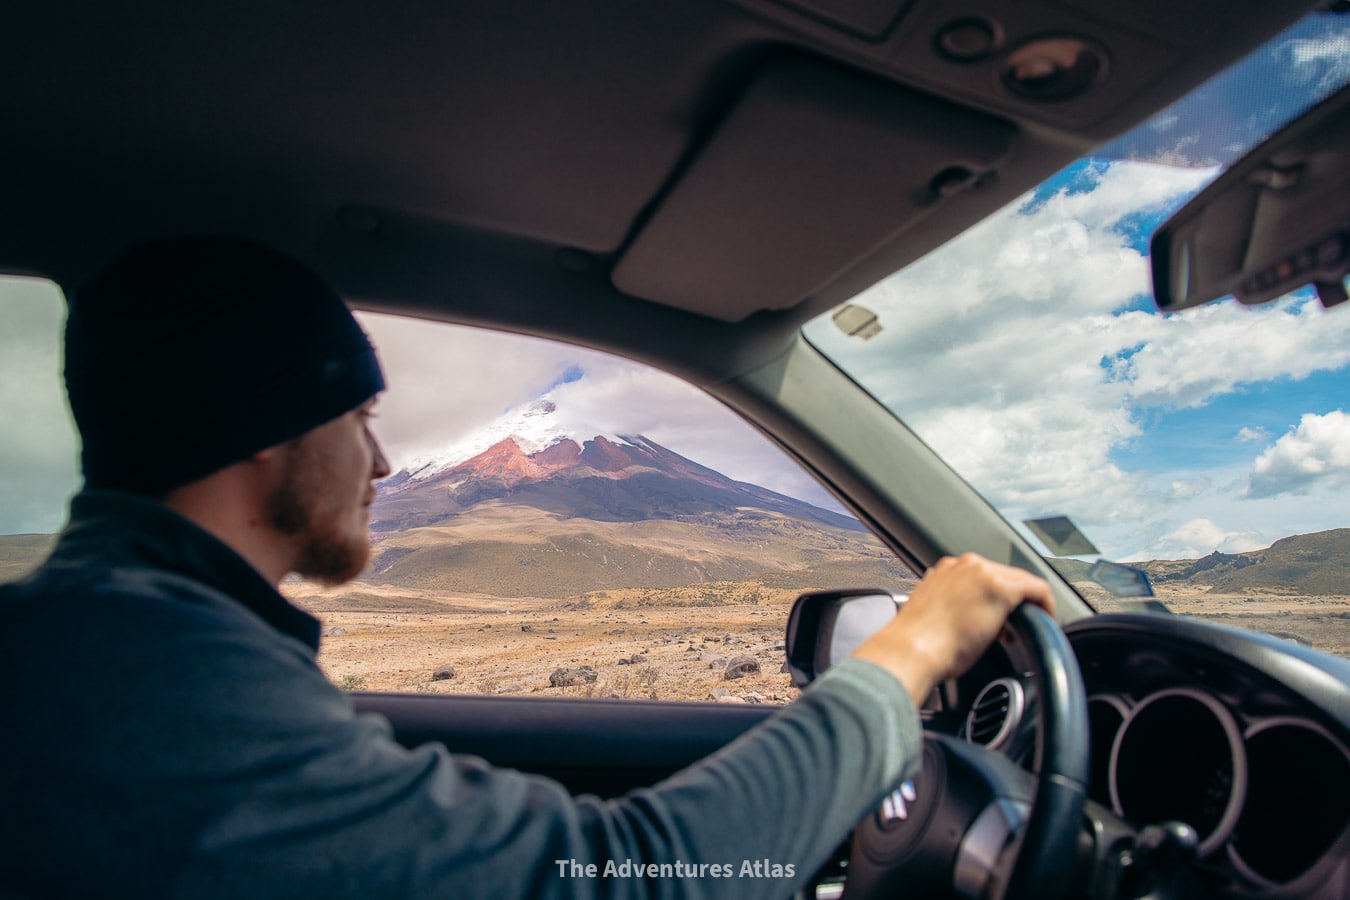 Driving in Cotopaxi National Park without a guide